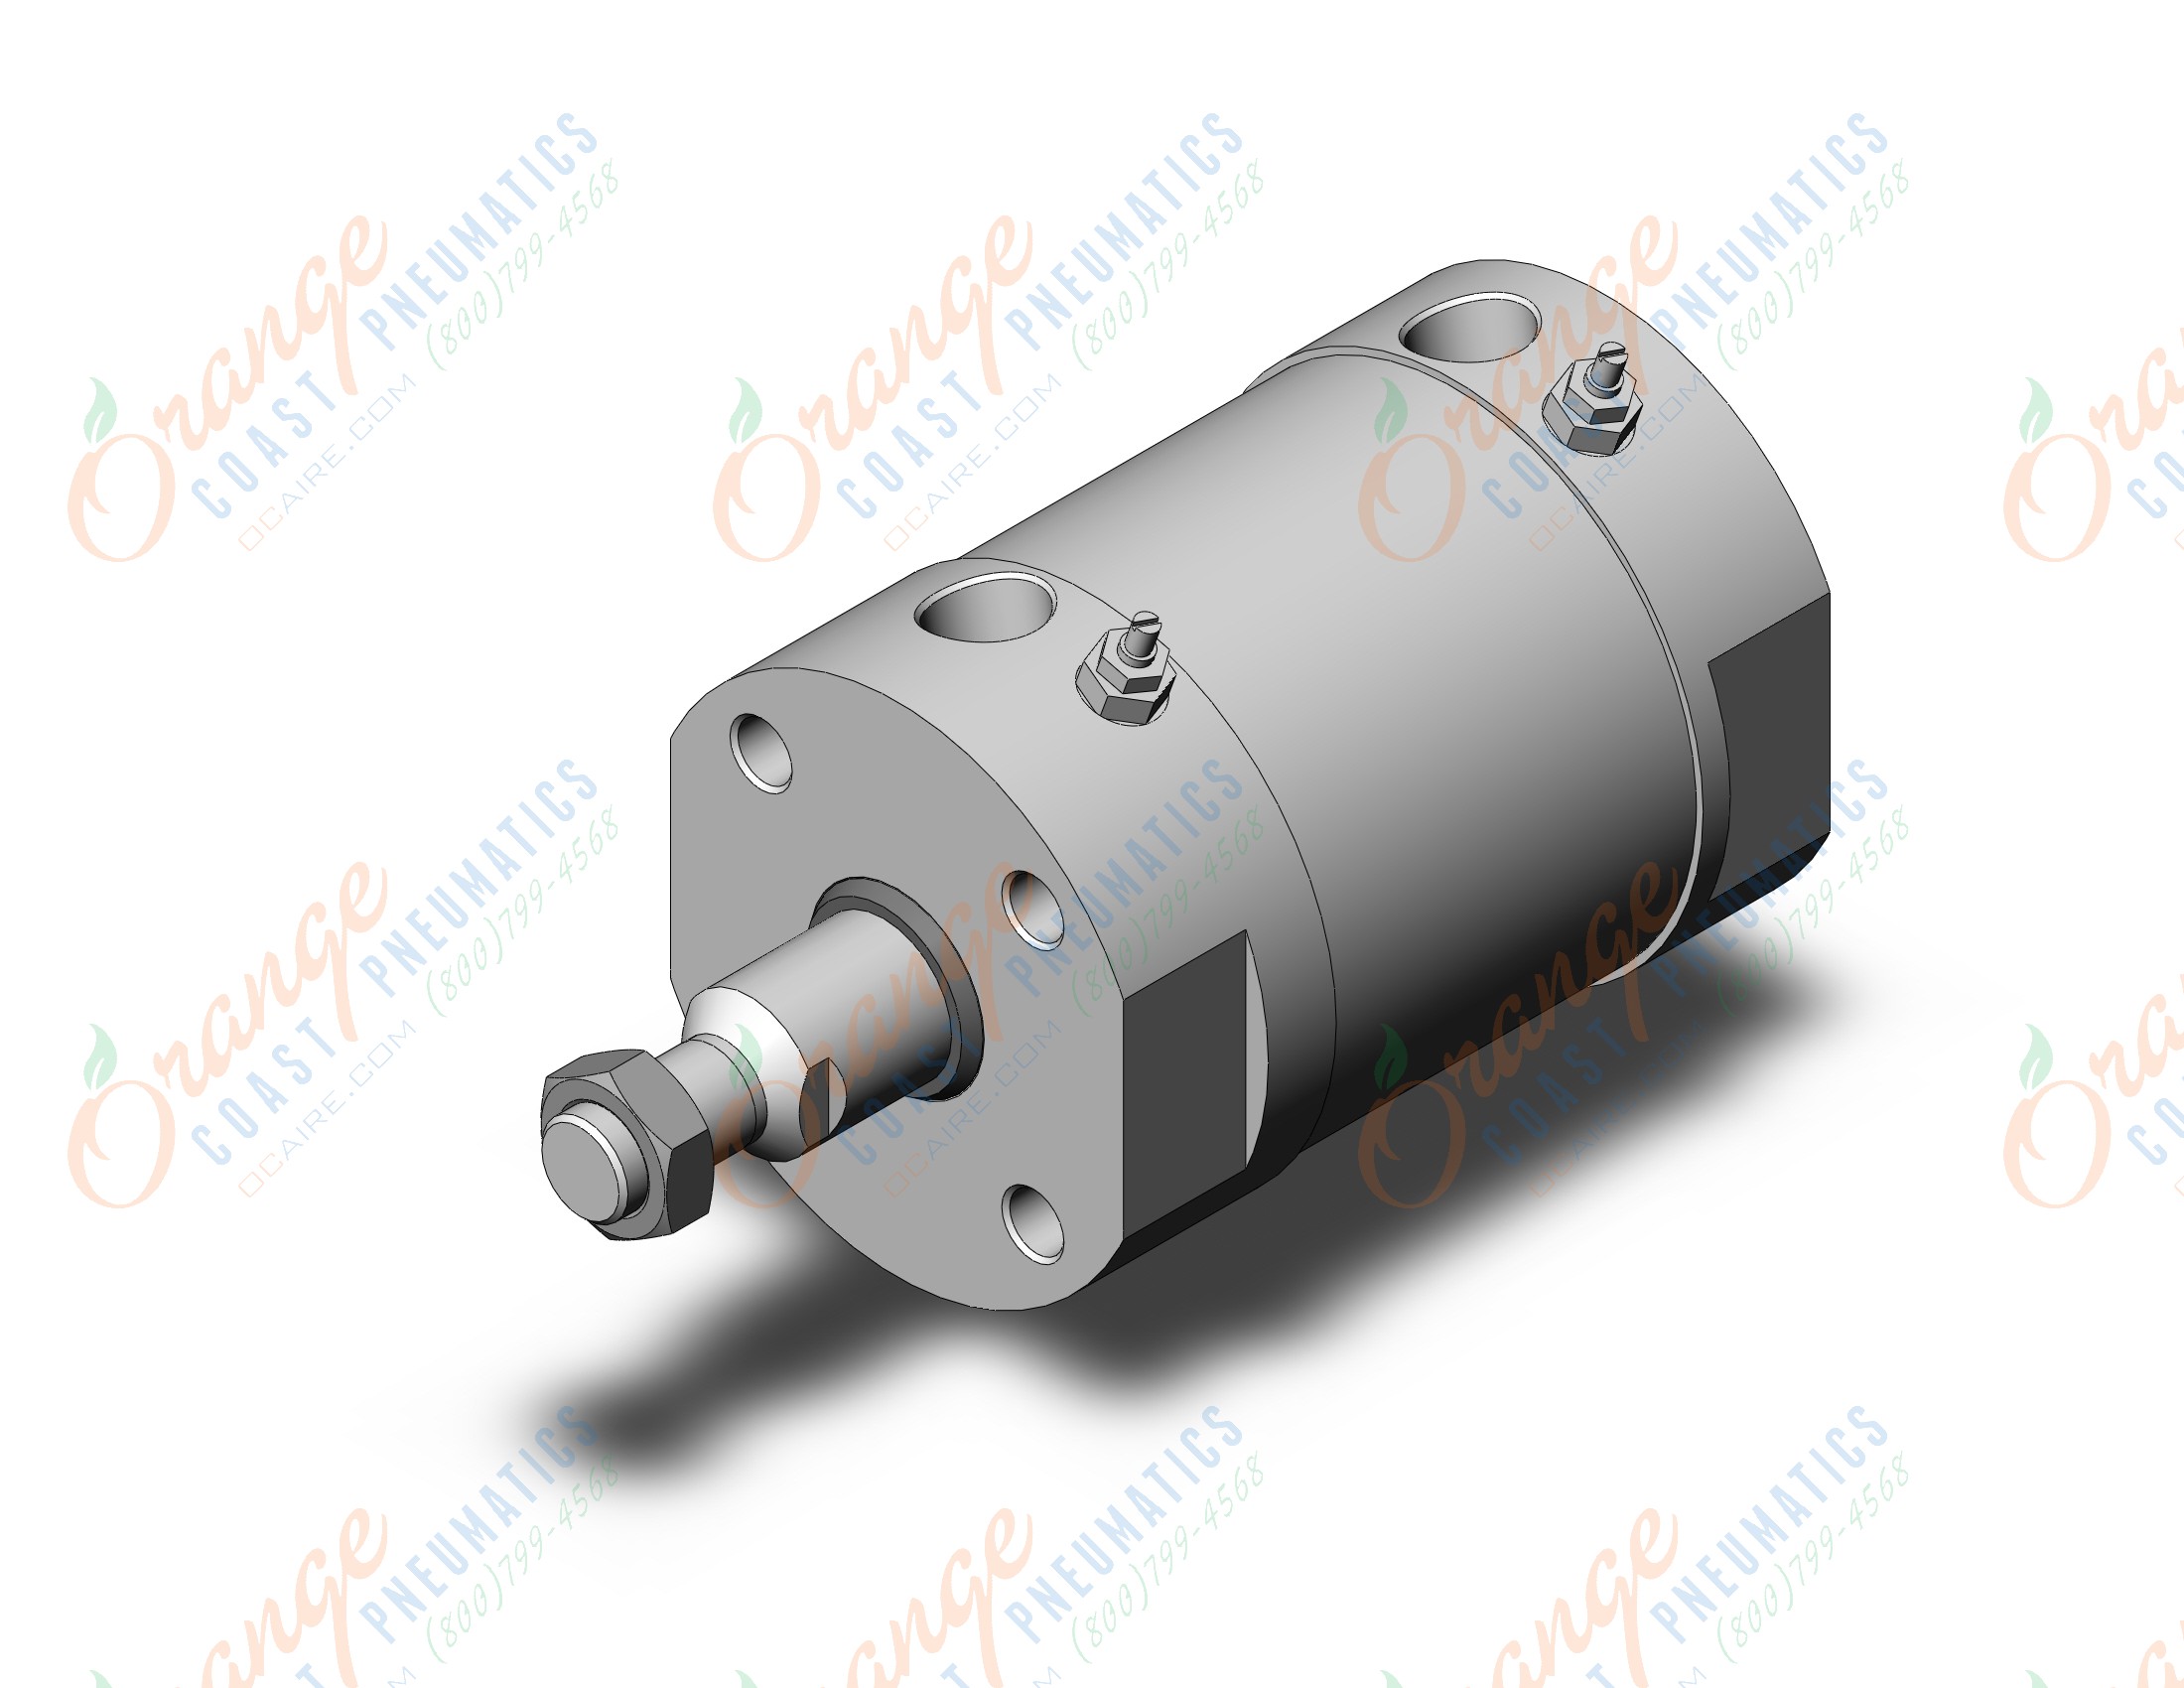 SMC CG5BA100TNSR-25-X165US cg5, stainless steel cylinder, WATER RESISTANT CYLINDER